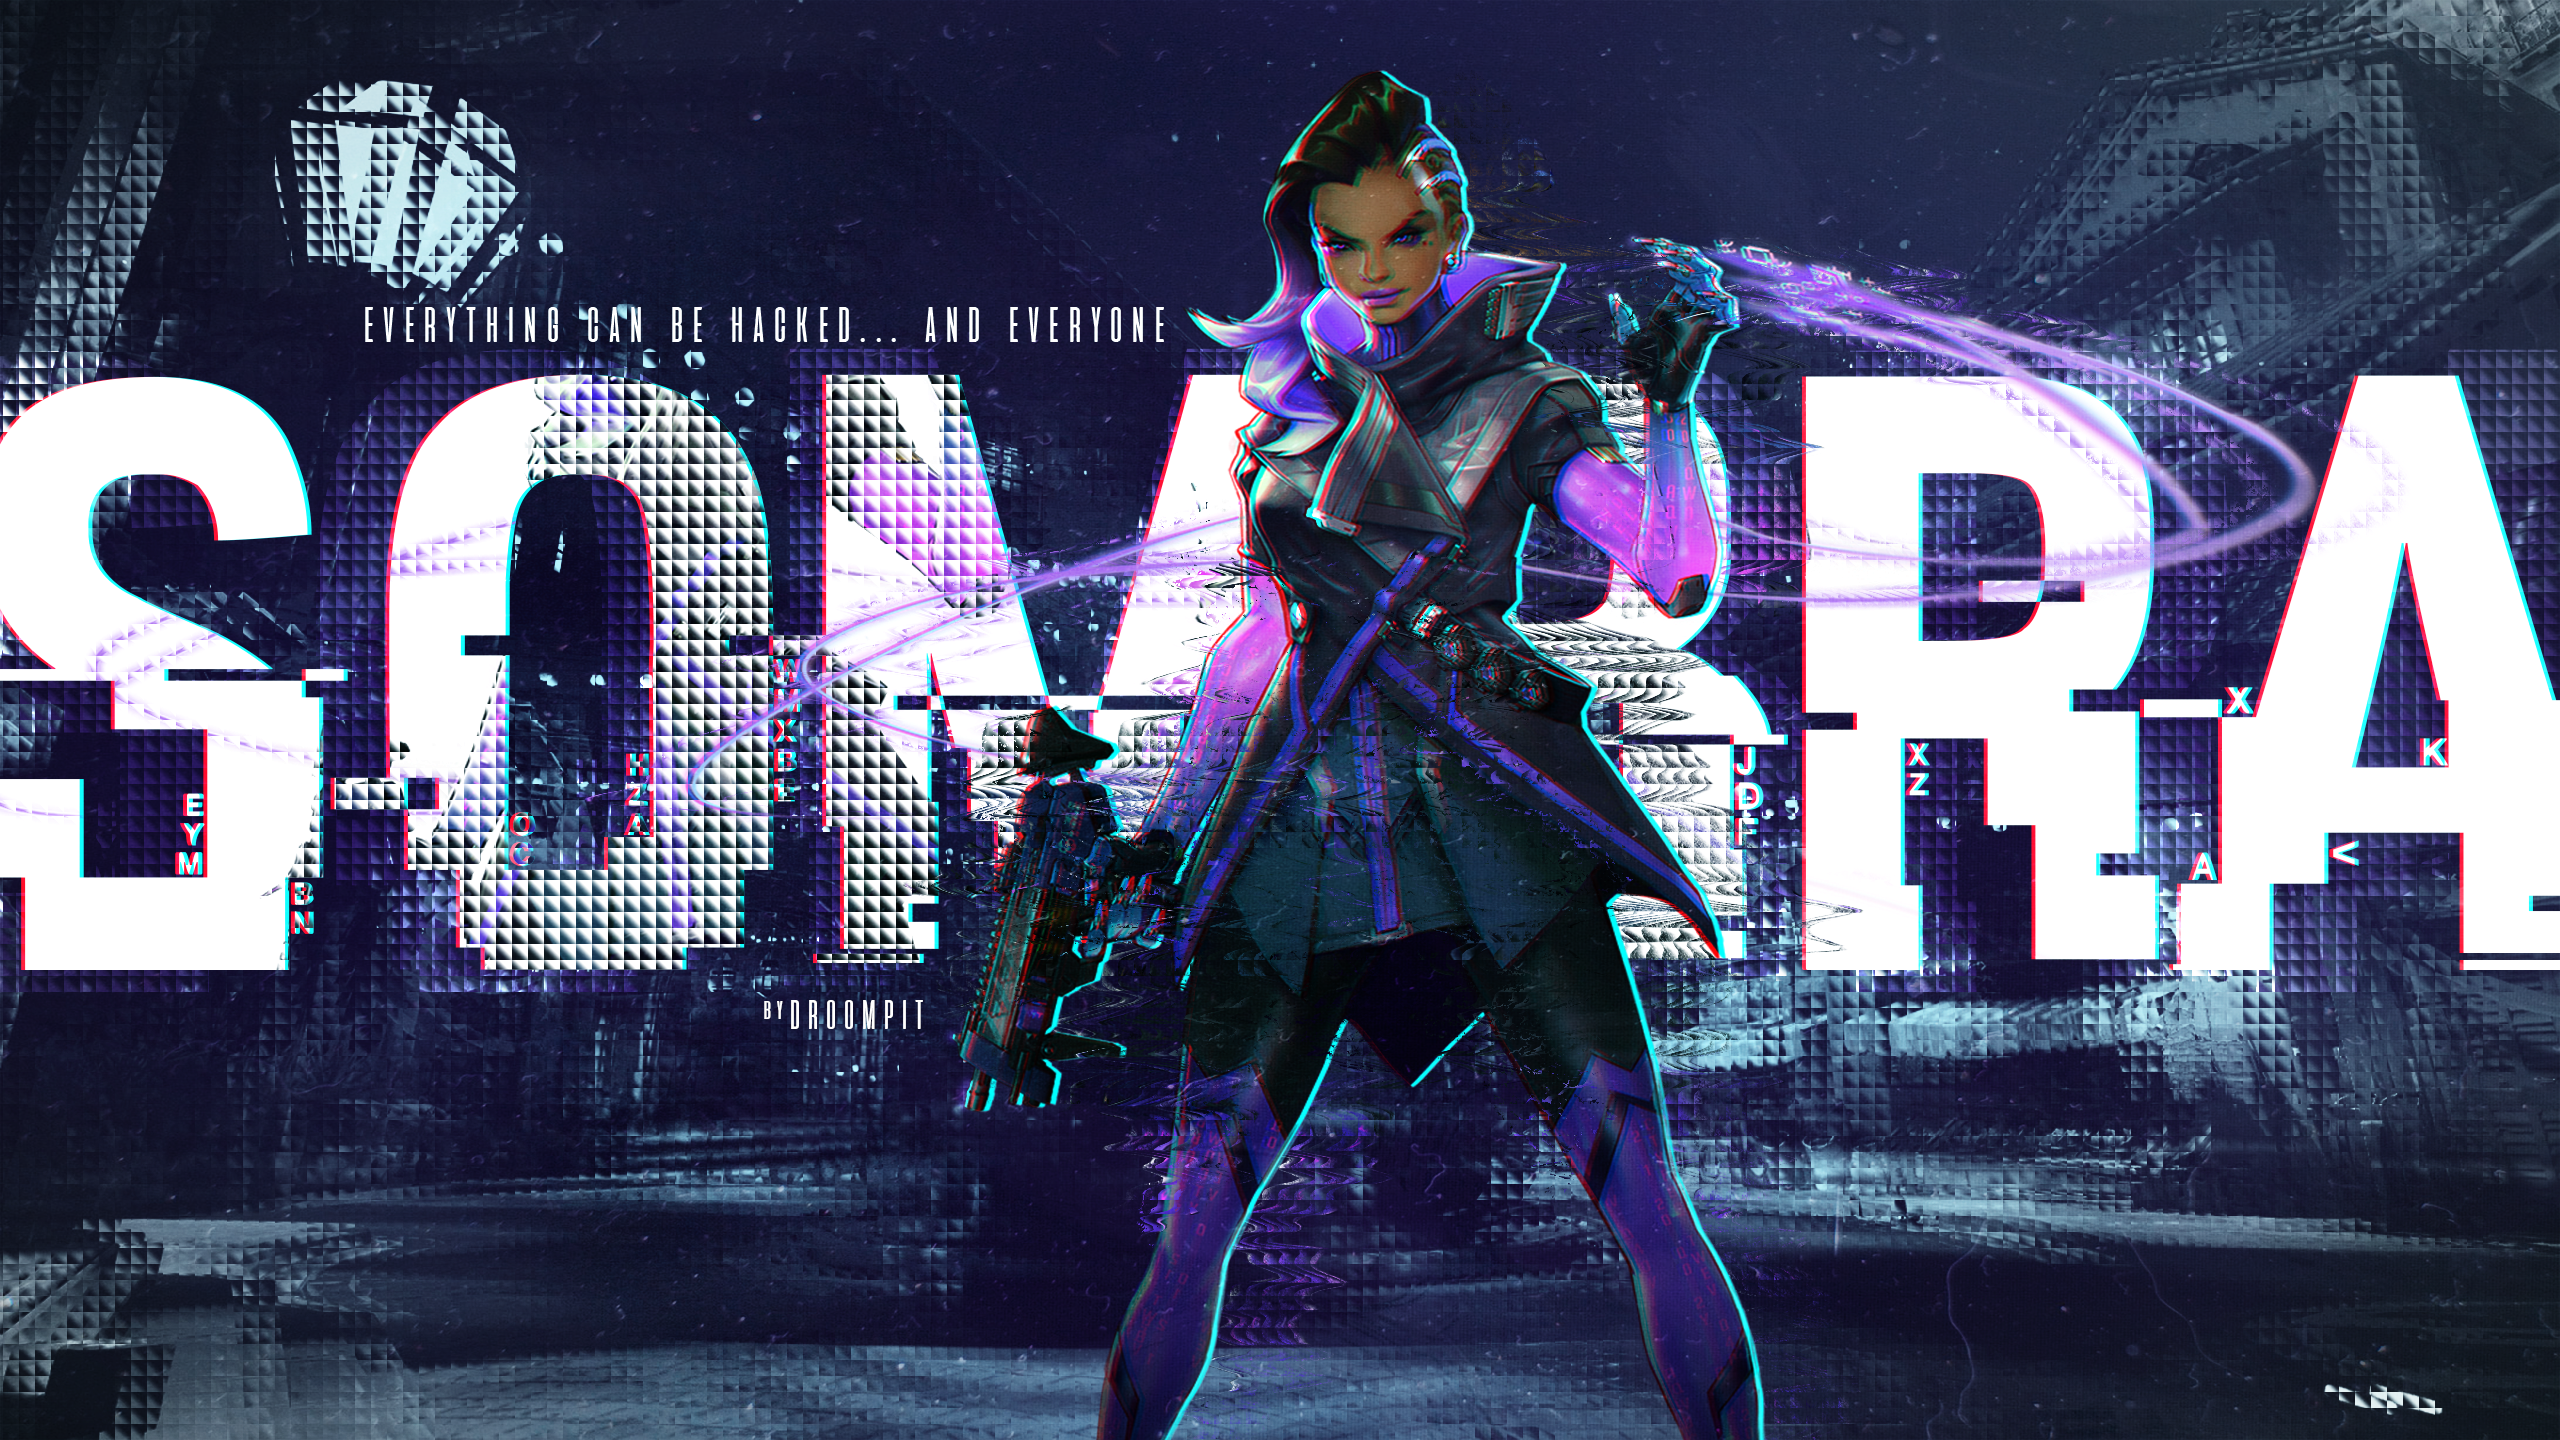 General 2560x1440 Sombra (Overwatch) Overwatch glitch art video game characters digital art text